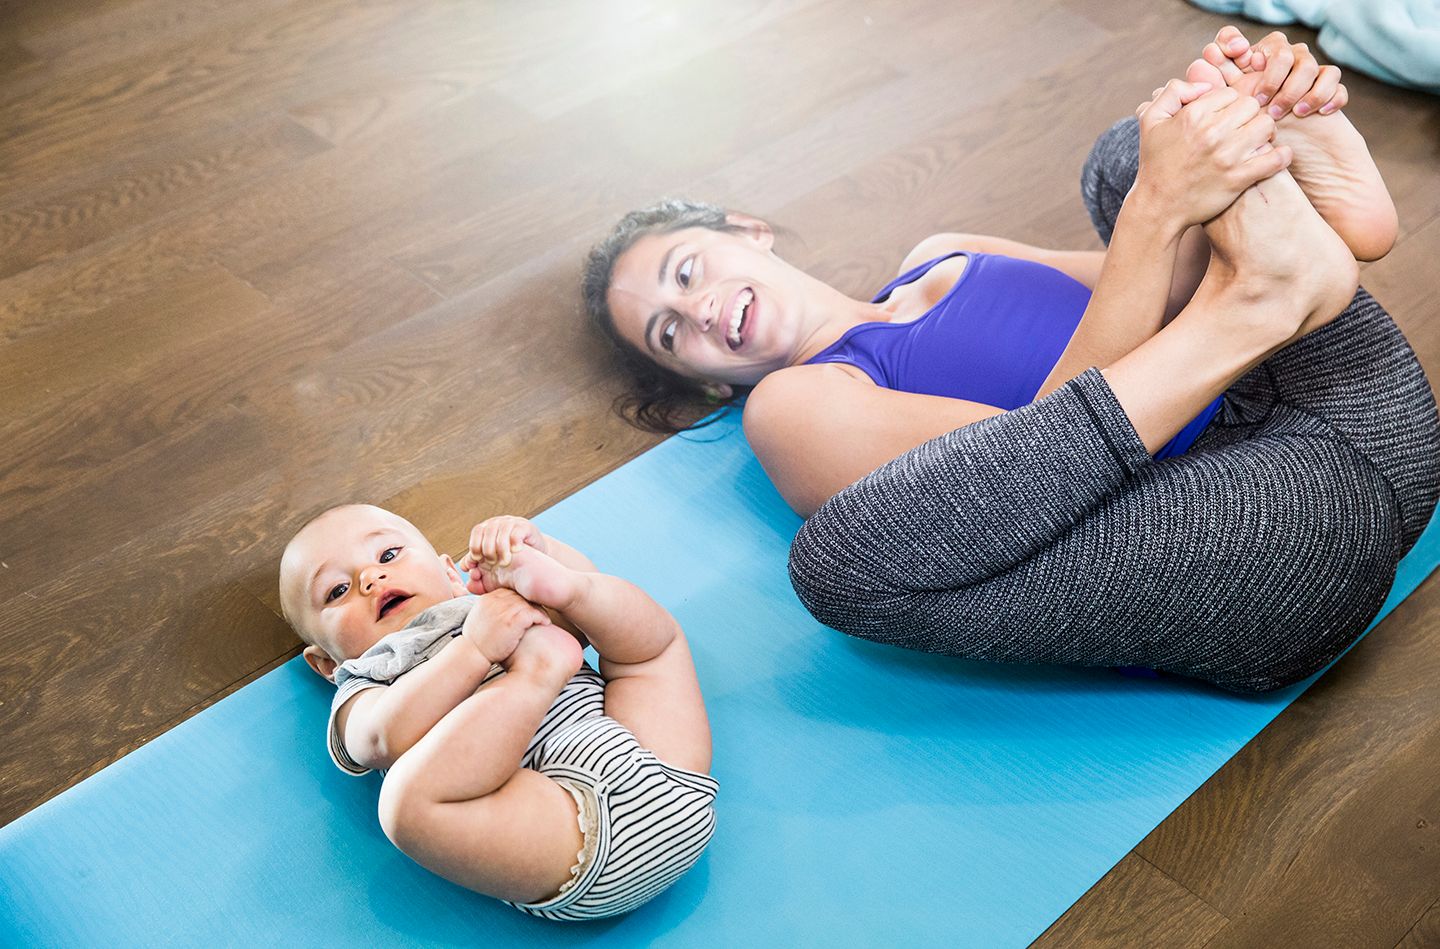 Woman doing stretches on her back on yoga mat looking at smiling at baby next to her in same pose holding legs